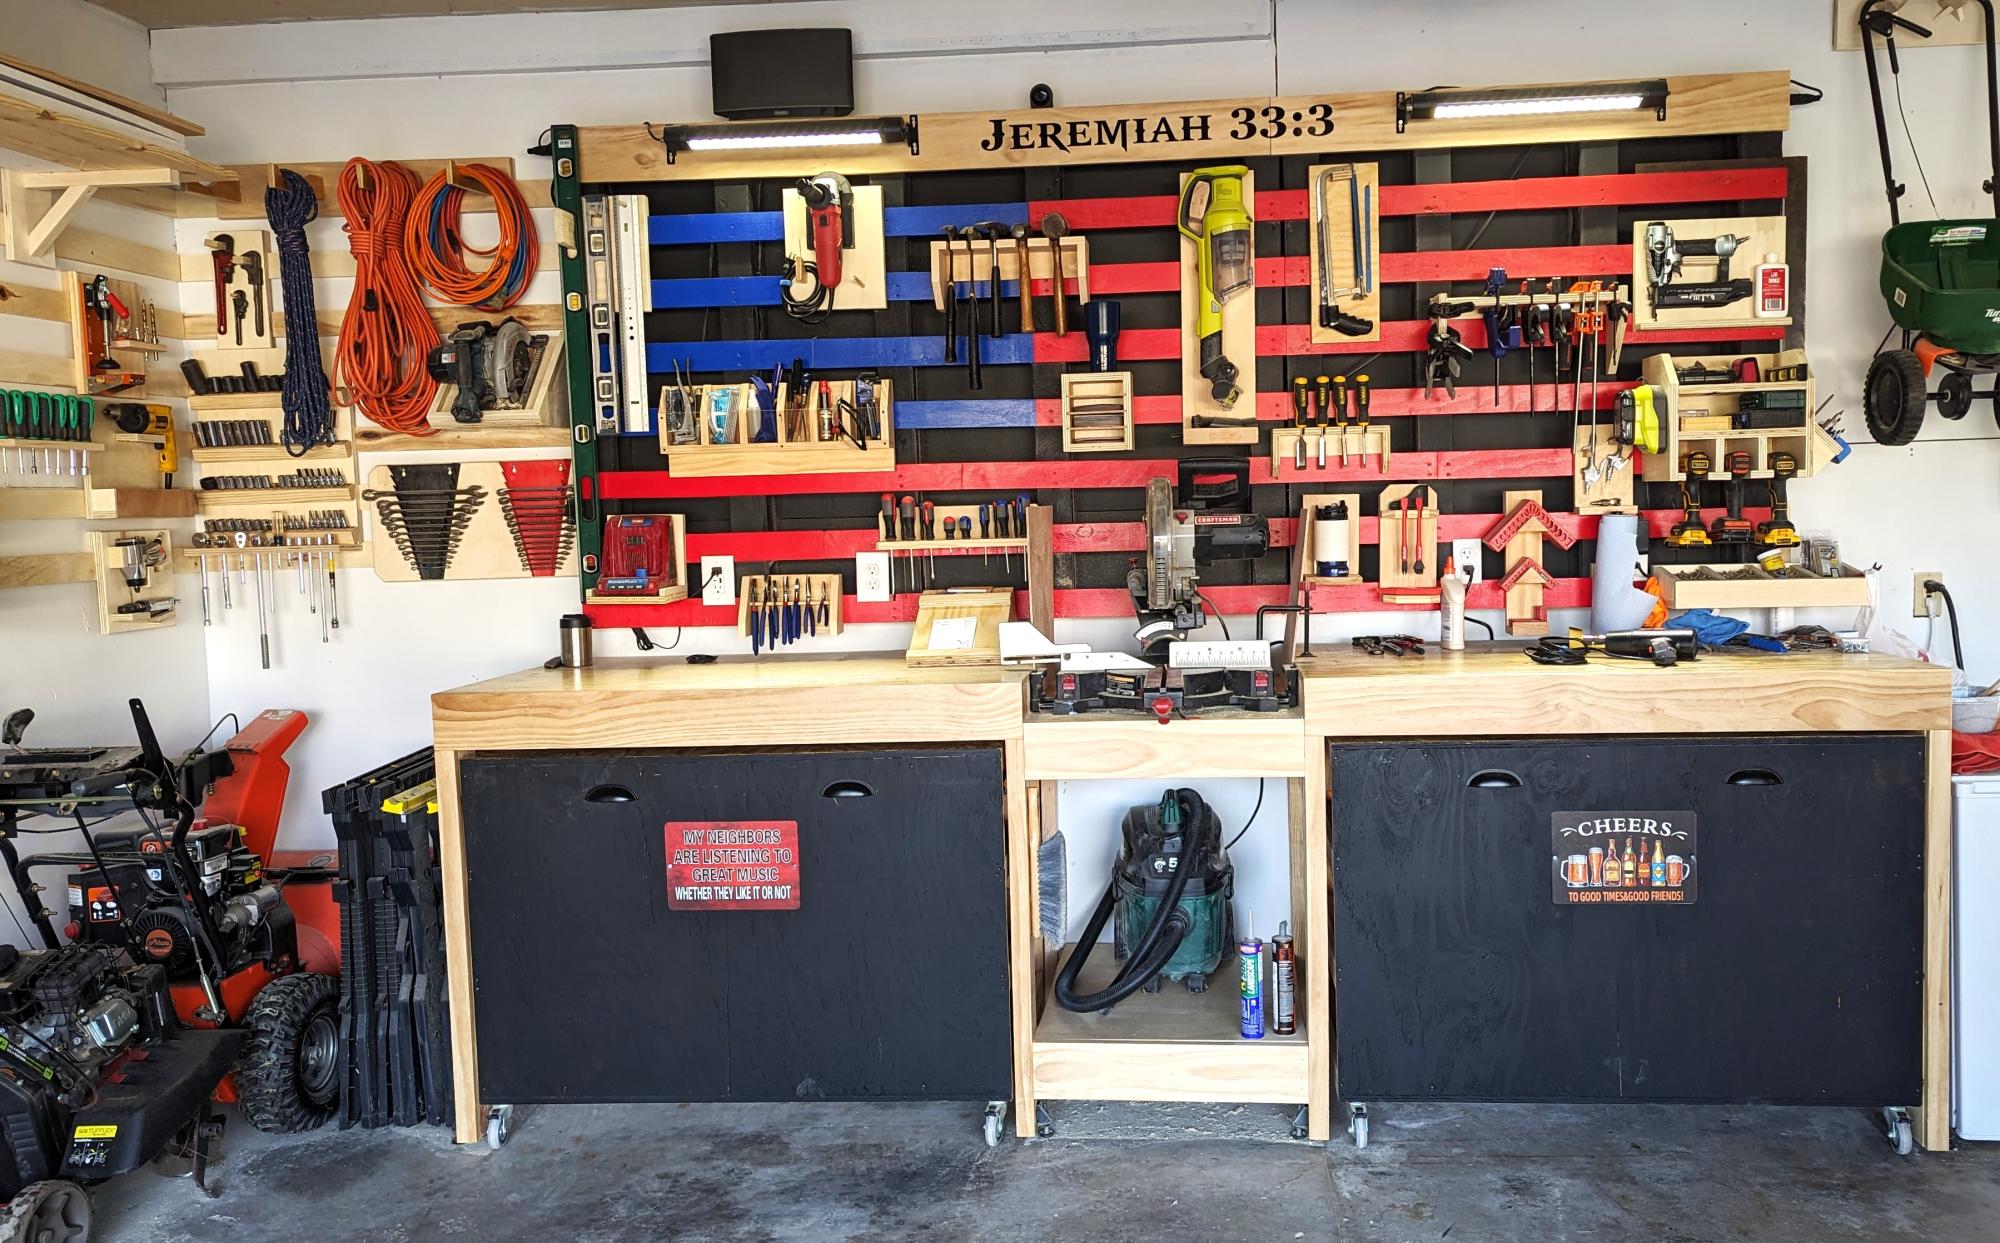 How To Build the Ultimate Garage Workshop